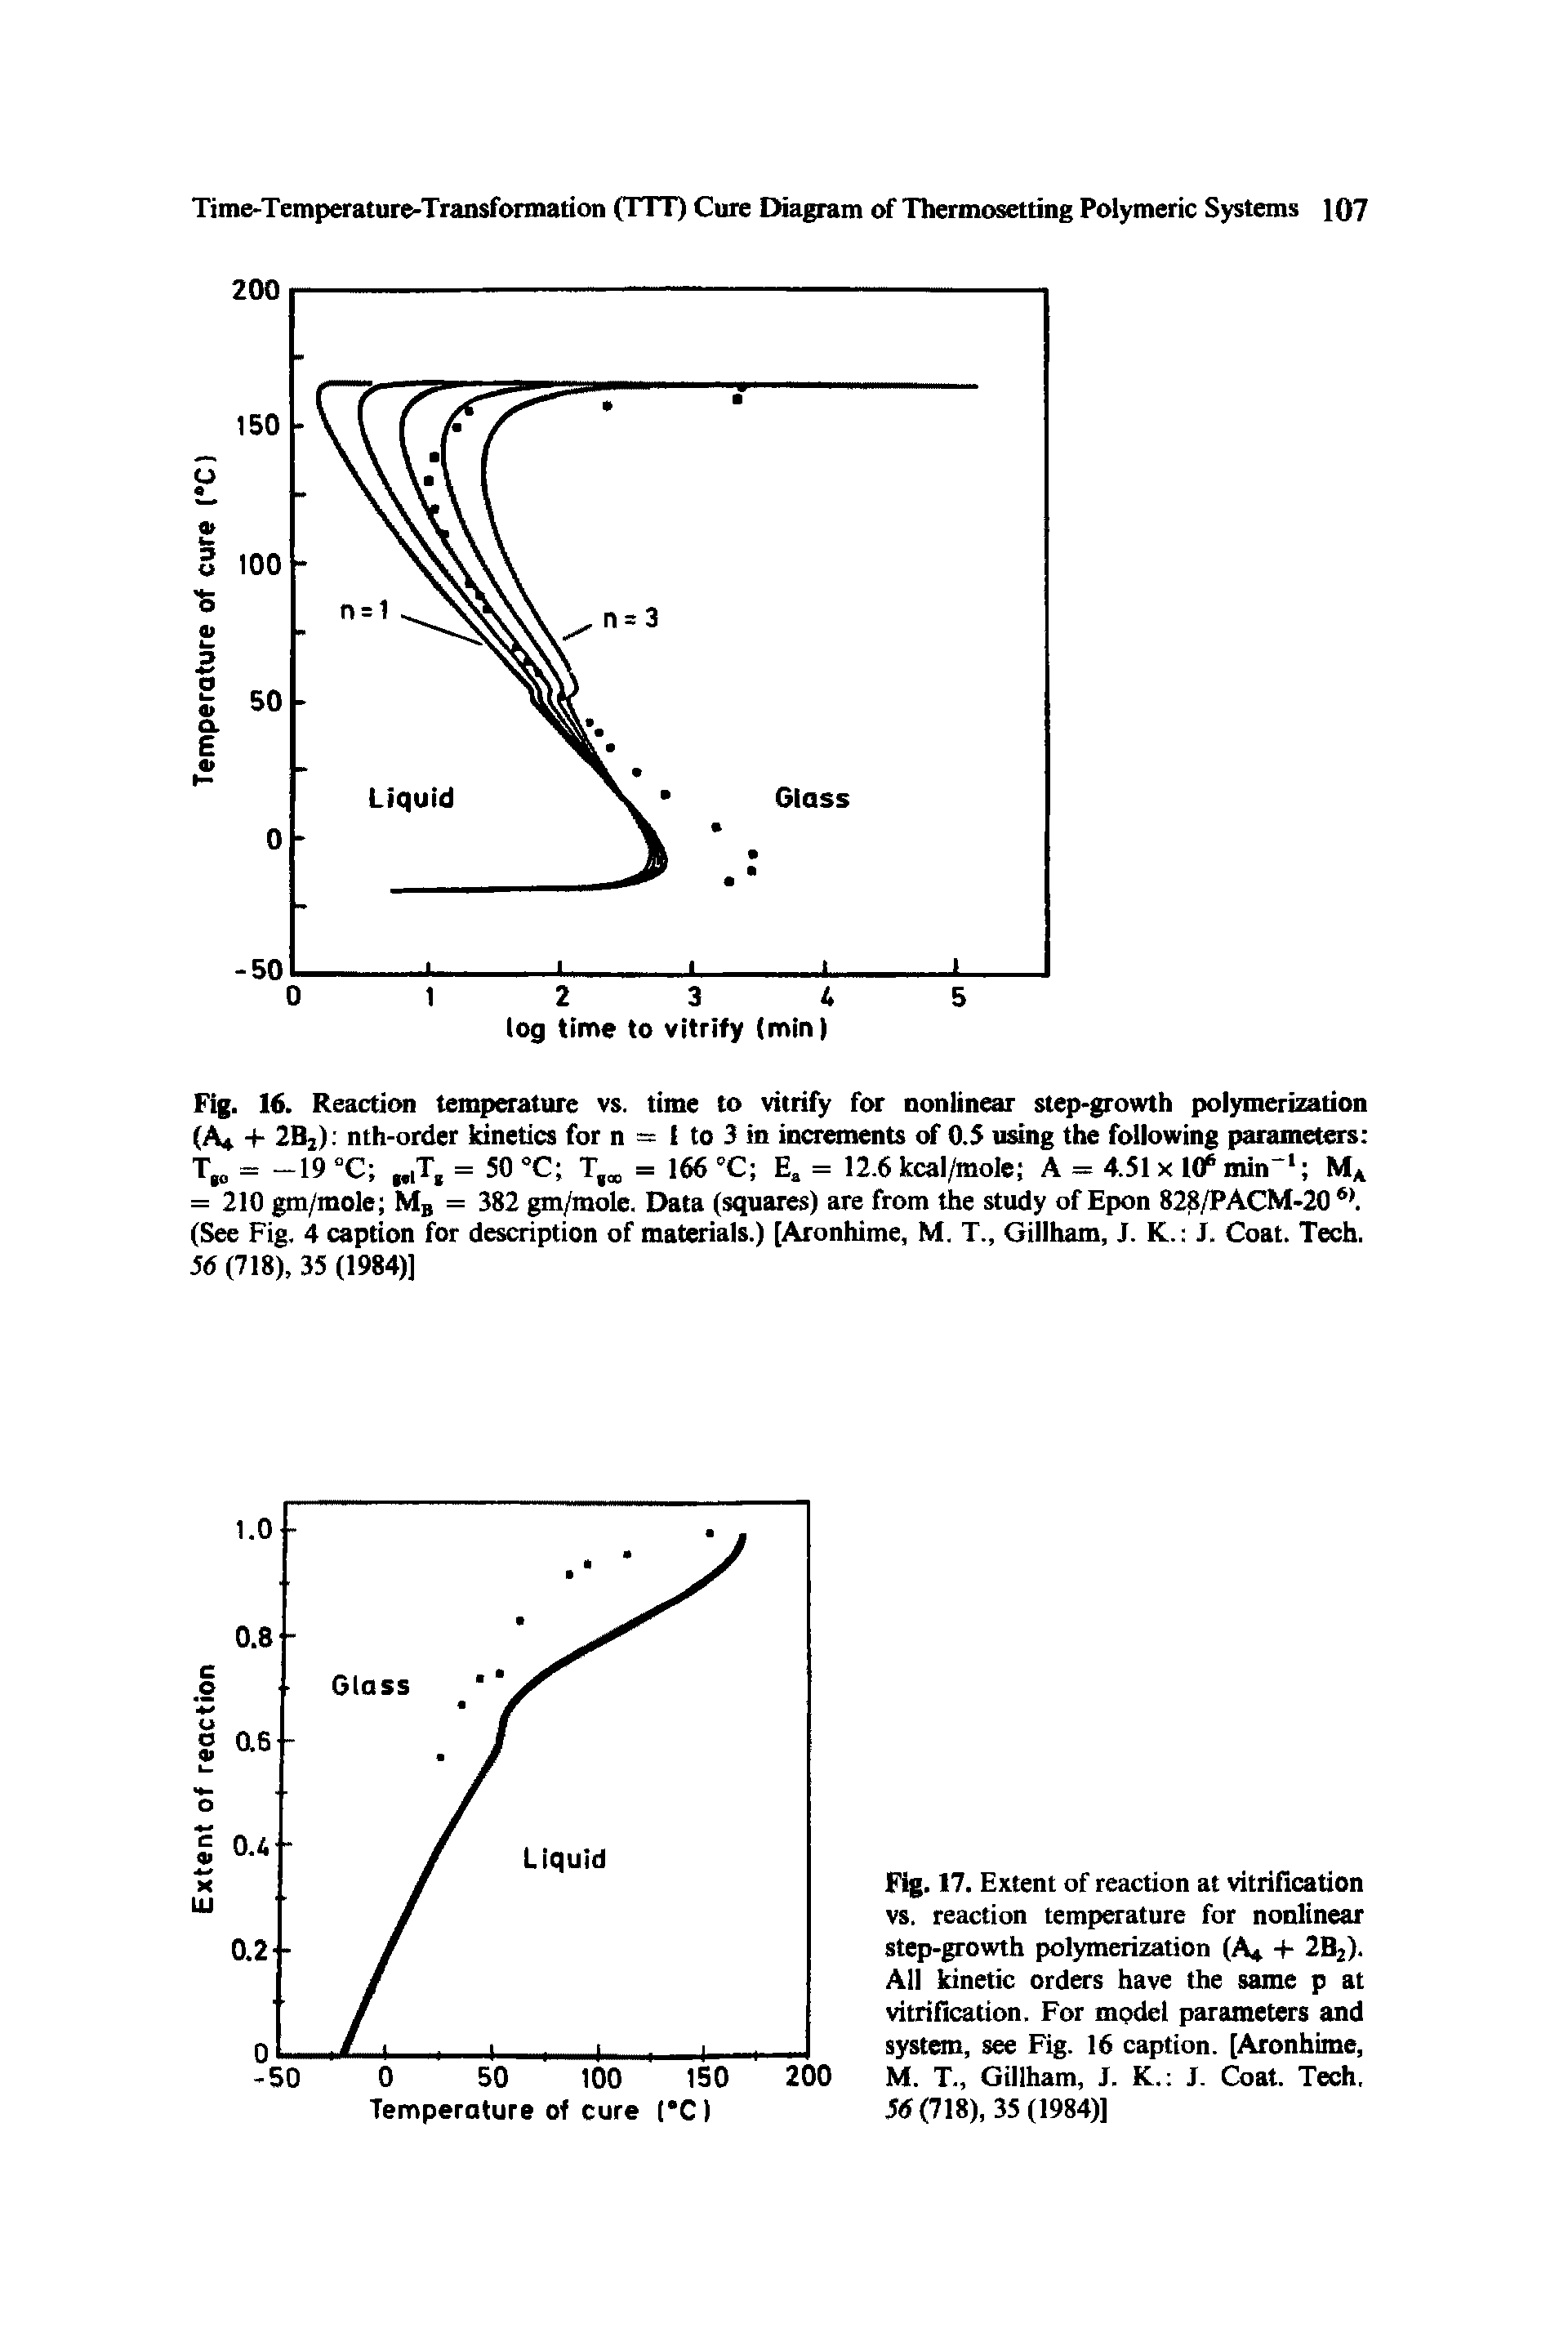 Fig. 17. Extent of reaction at vitrification vs. reaction temperature for nonlinear step-growth polymerization (A + 2B2). All kinetic orders have the same p at vitrification. For mpdel parameters and system, see Fig. 16 caption. [Aronhime,...